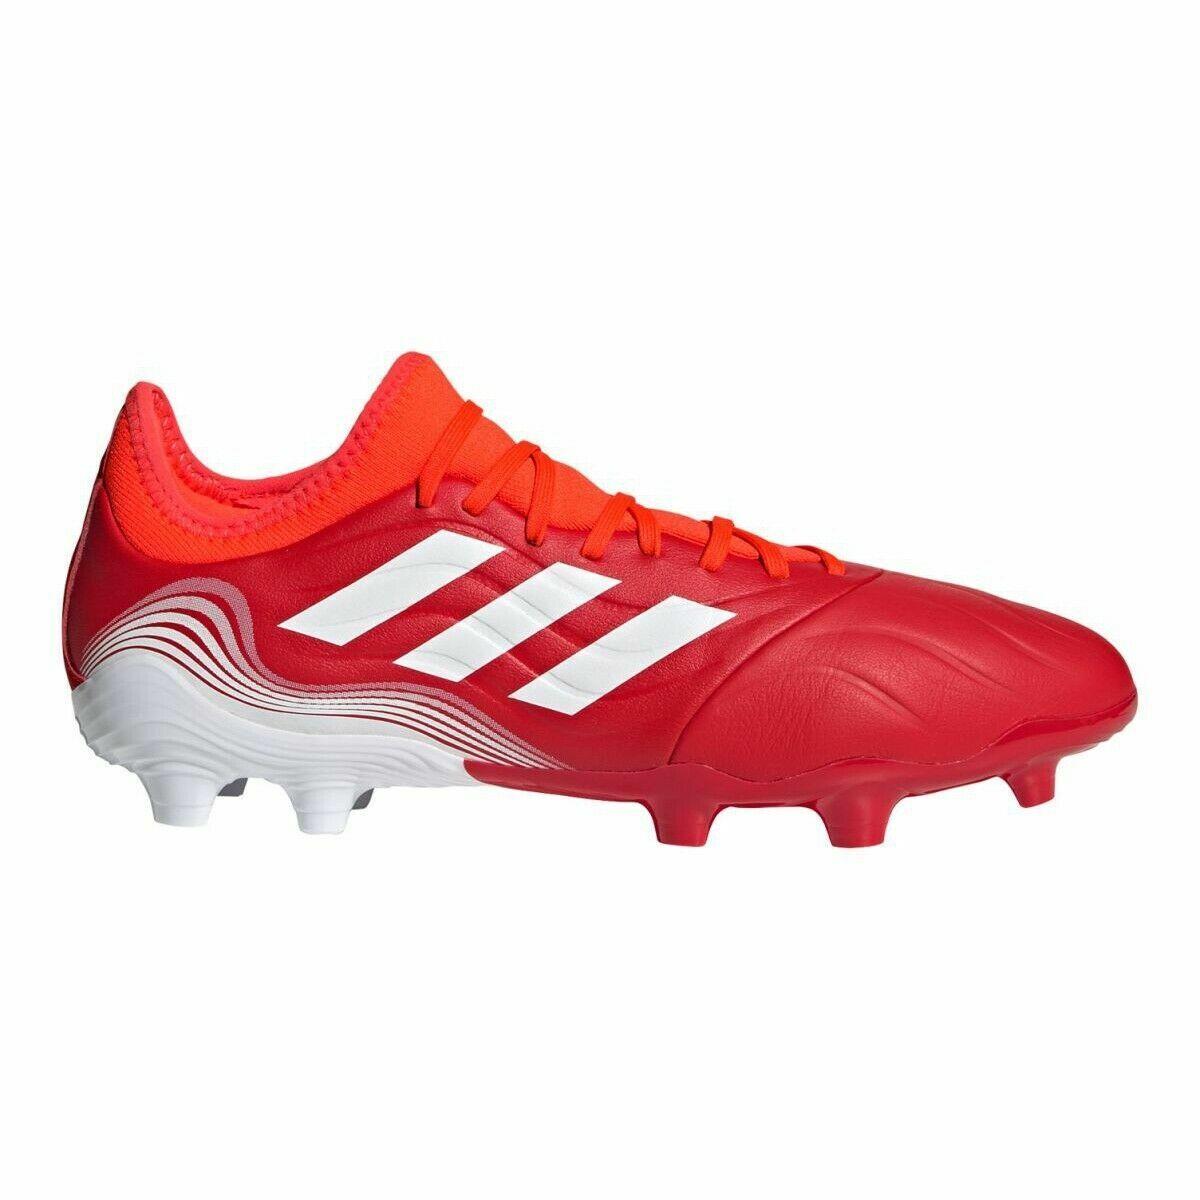 Adidas Copa Sense.3 Fg M FY6196 Football/soccer Multicolored Cleat Mens Size 13